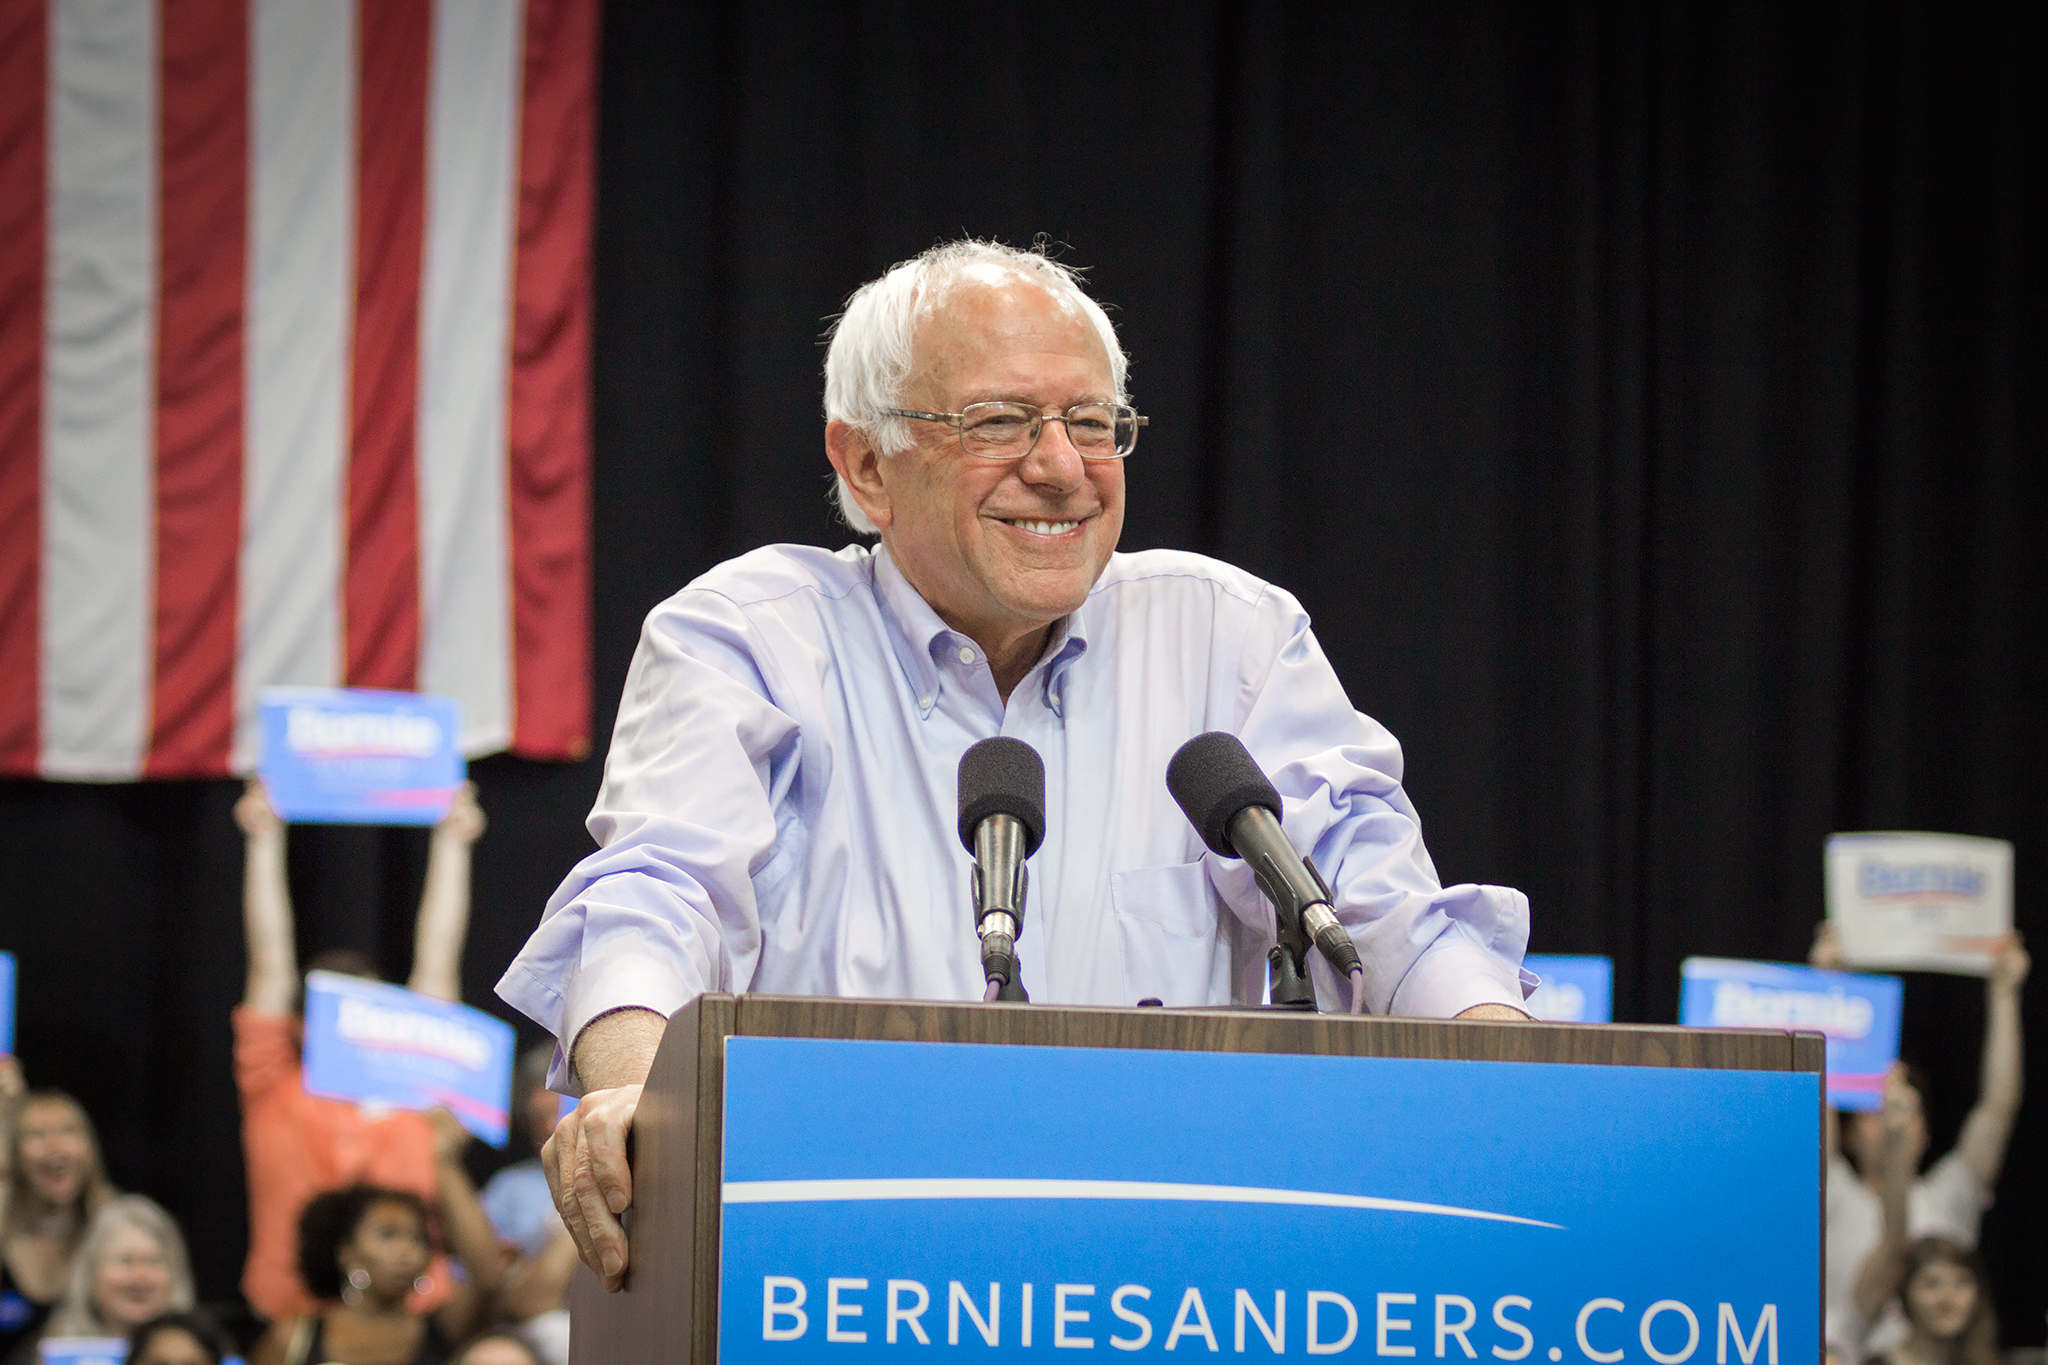 Sanders Stays Committed to Promise Despite Boos From Supporters